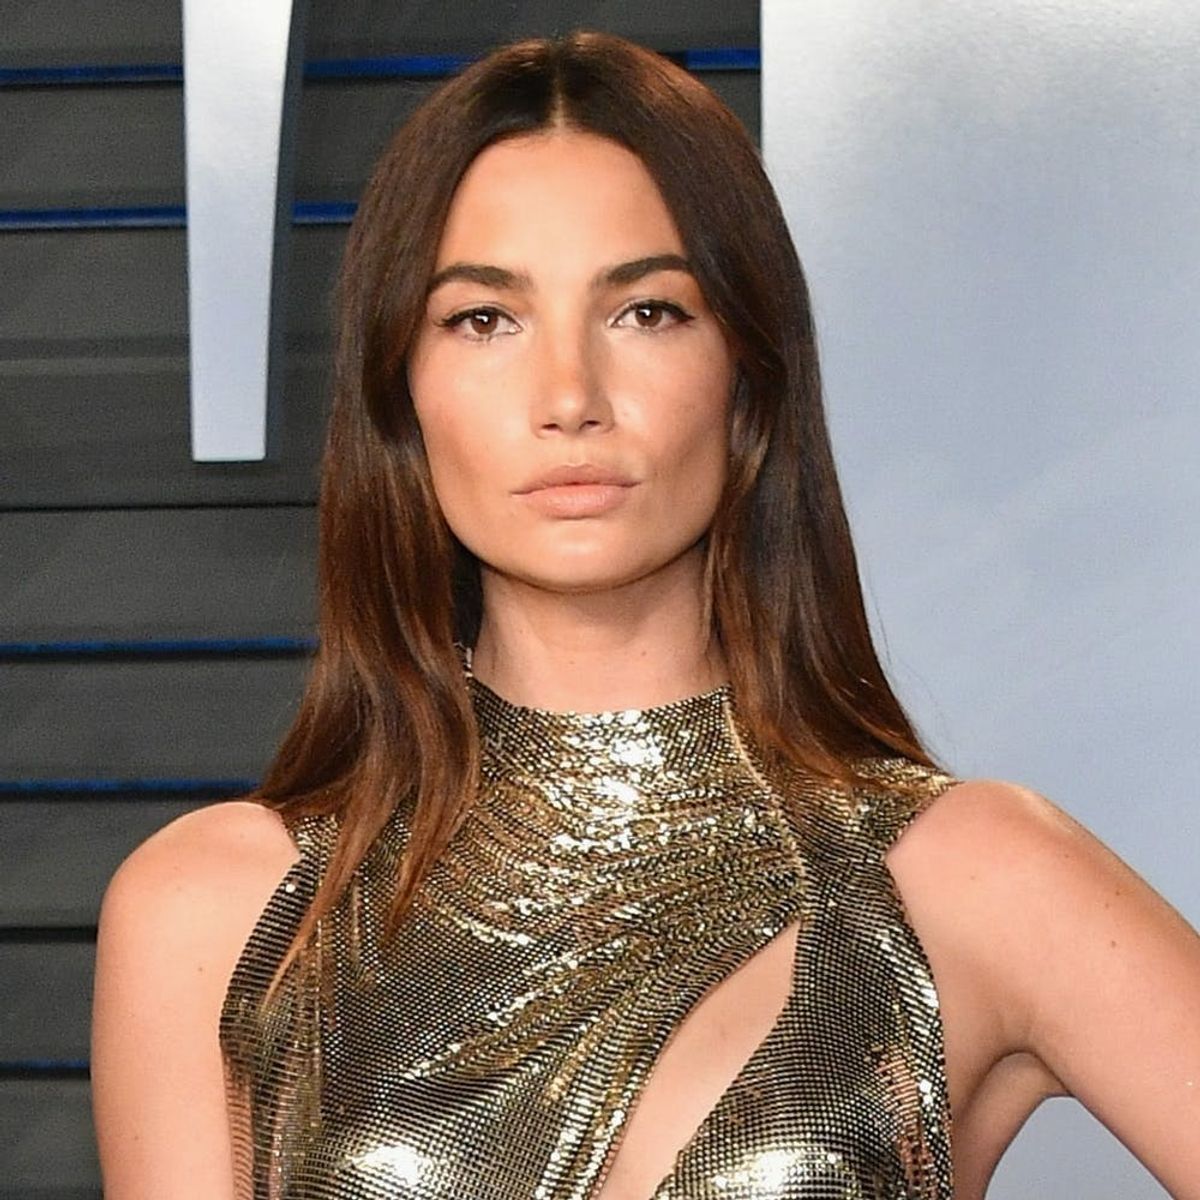 Lily Aldridge Is Pregnant and Expecting Baby #2!